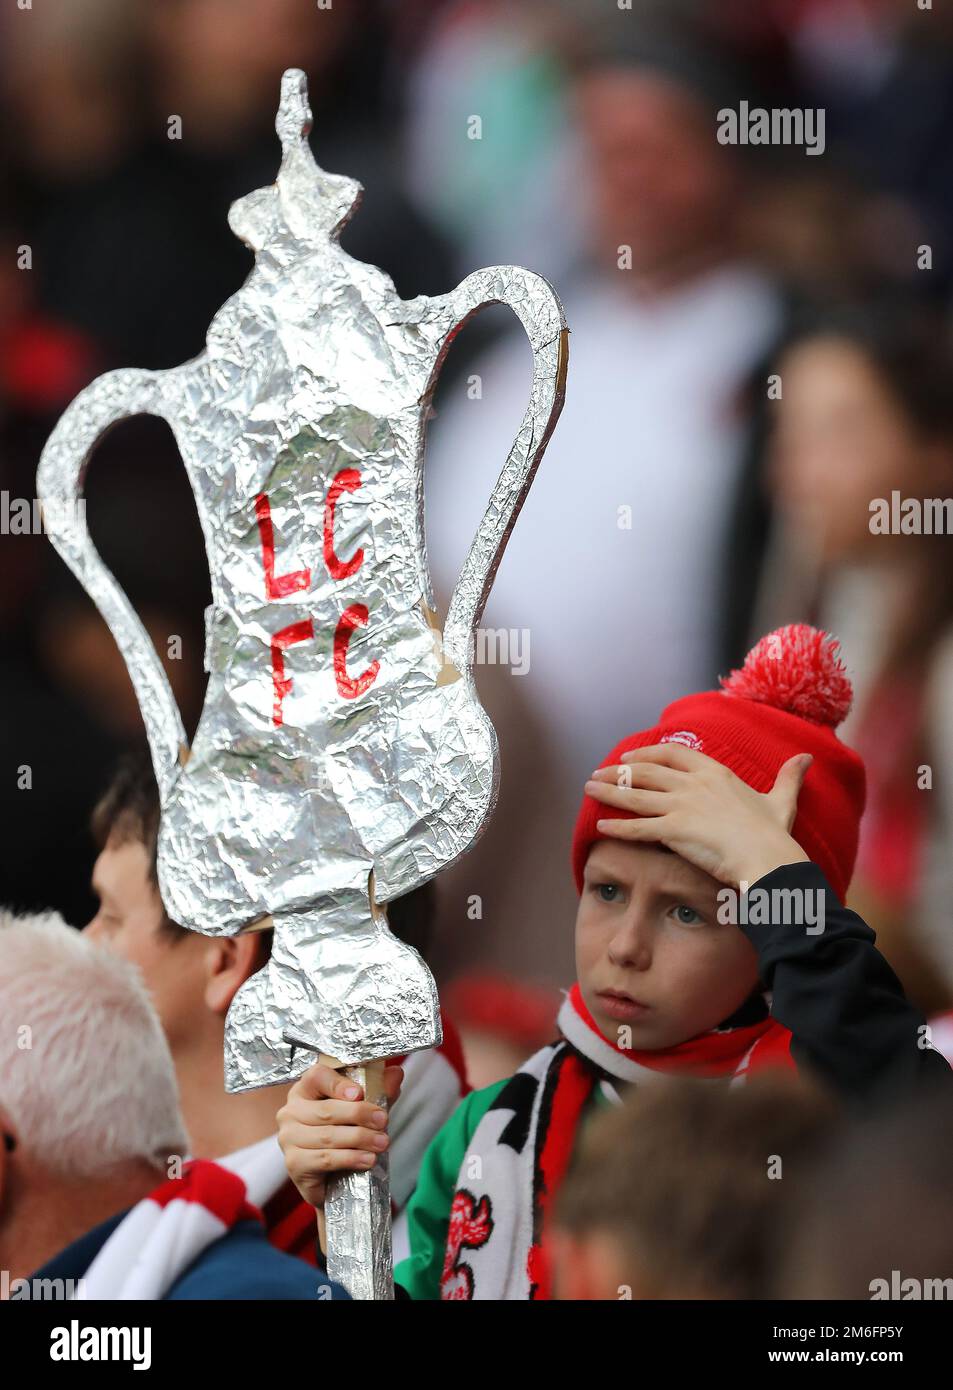 A young Lincoln City fan looks disappointed with a tin foil FA Cup - Arsenal v Lincoln City, The Emirates FA Cup Quarter-final, Emirates Stadium, London - 11th March 2017. Stock Photo